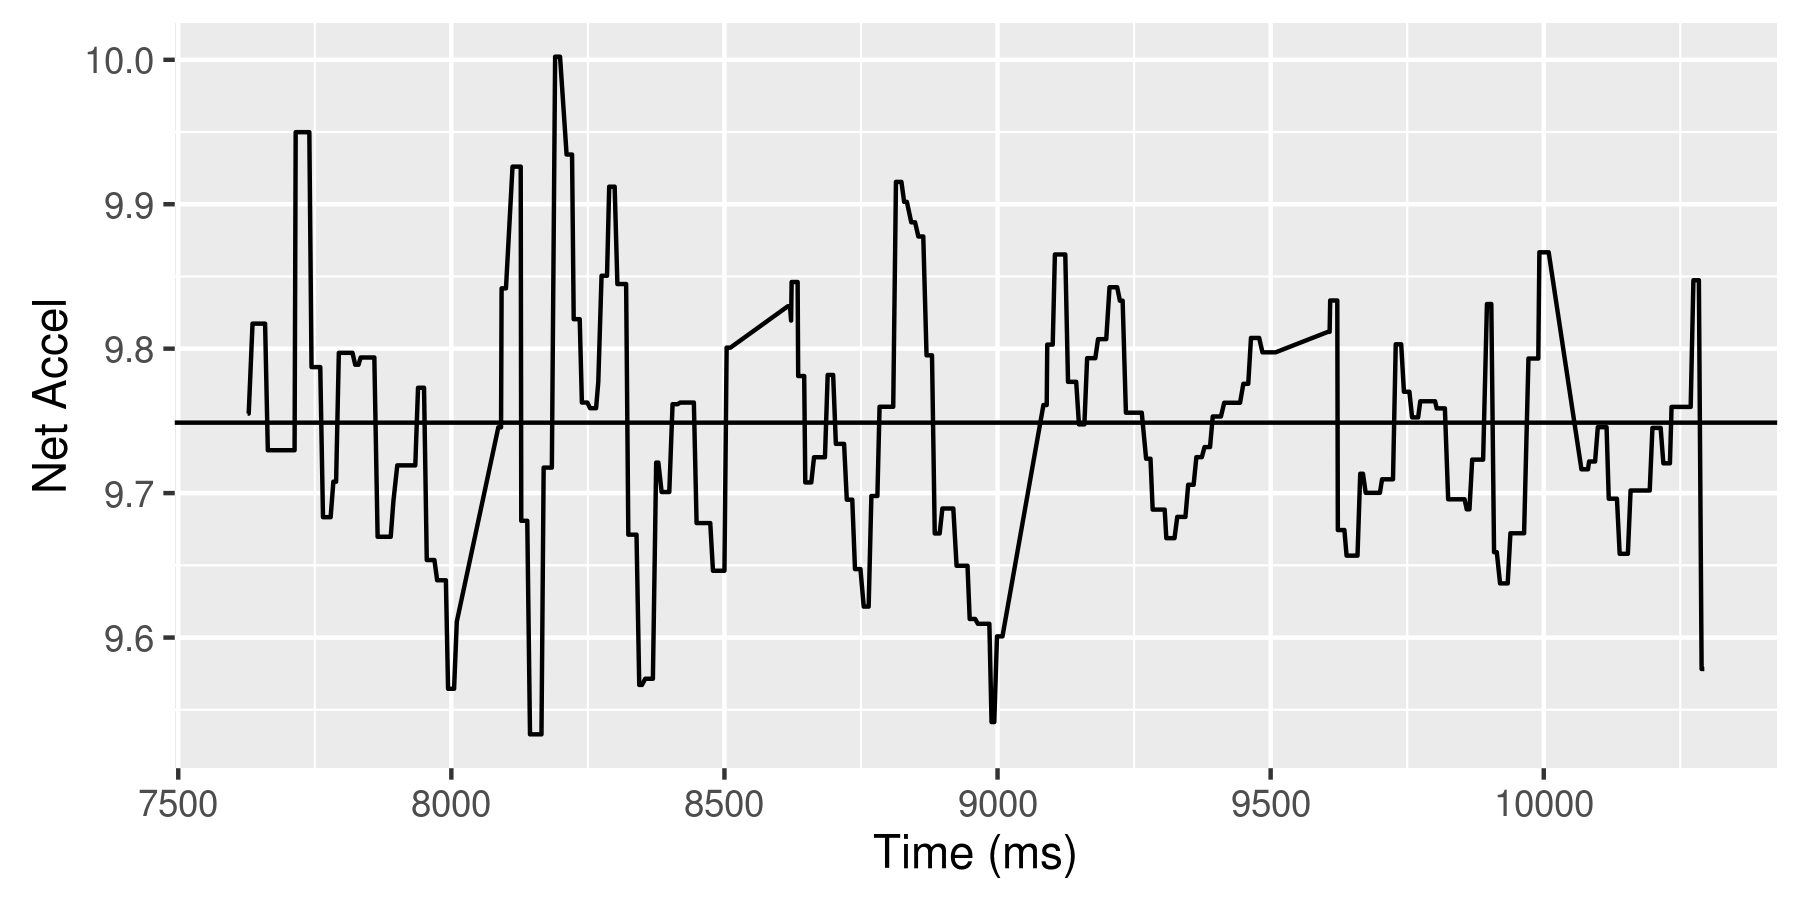 Accelerometer calibration data for the tree